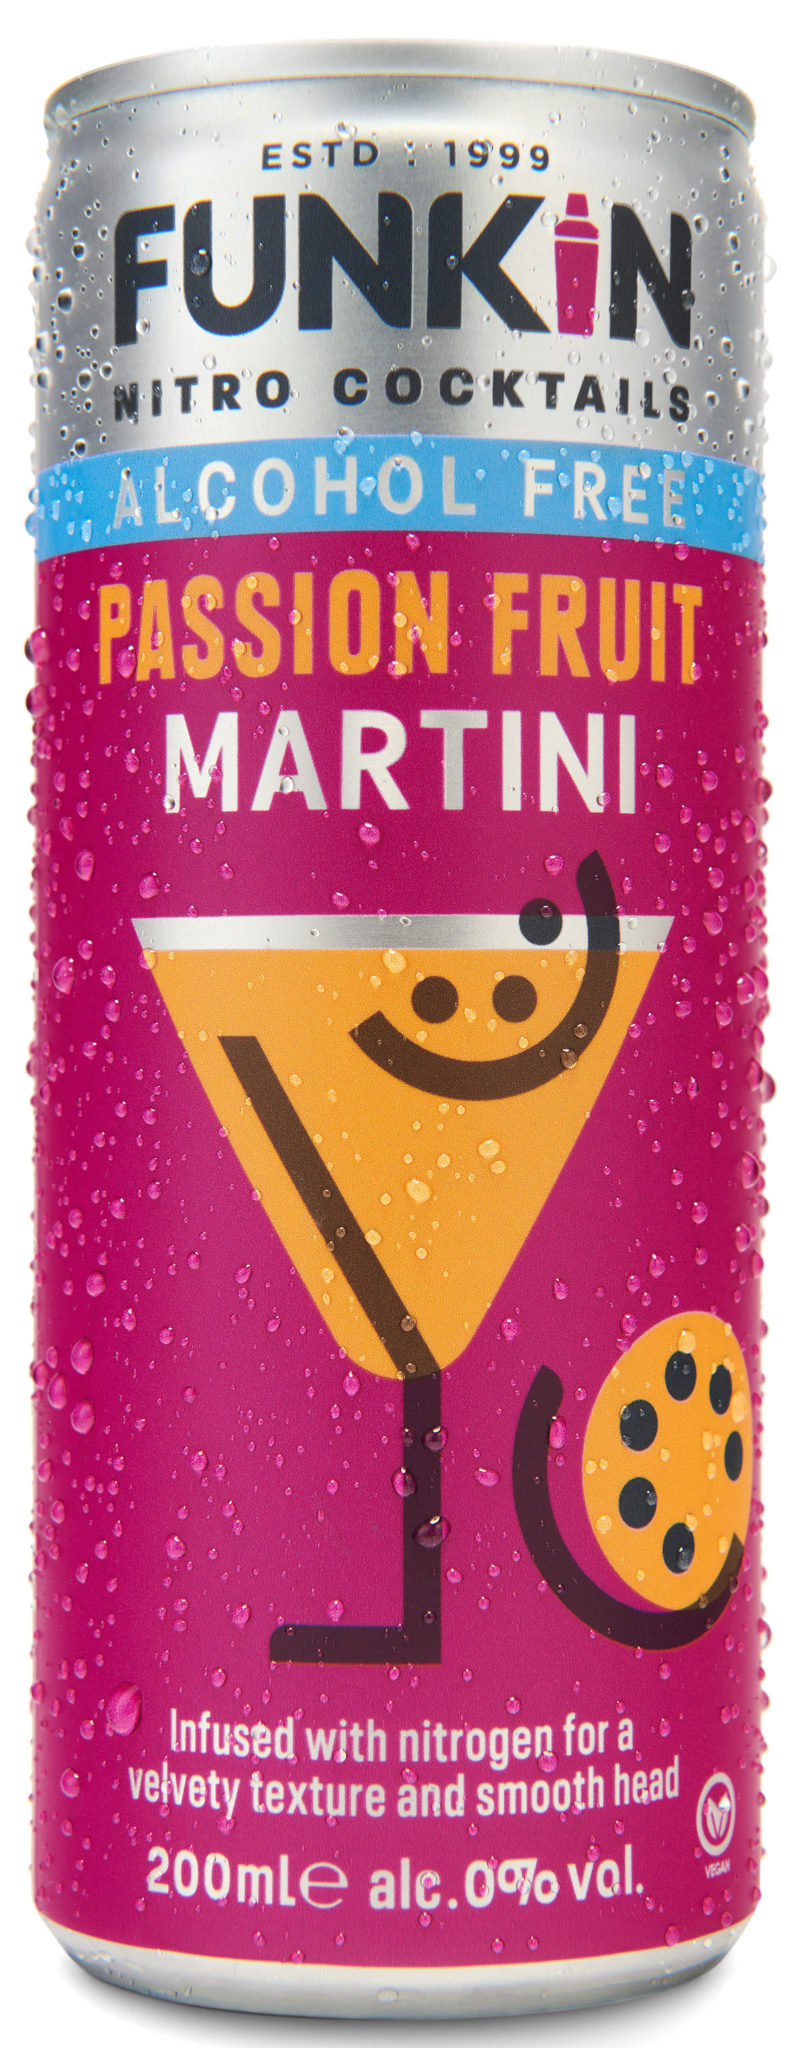 The Funkin Cocktails alcohol-free Passion Fruit Martini.